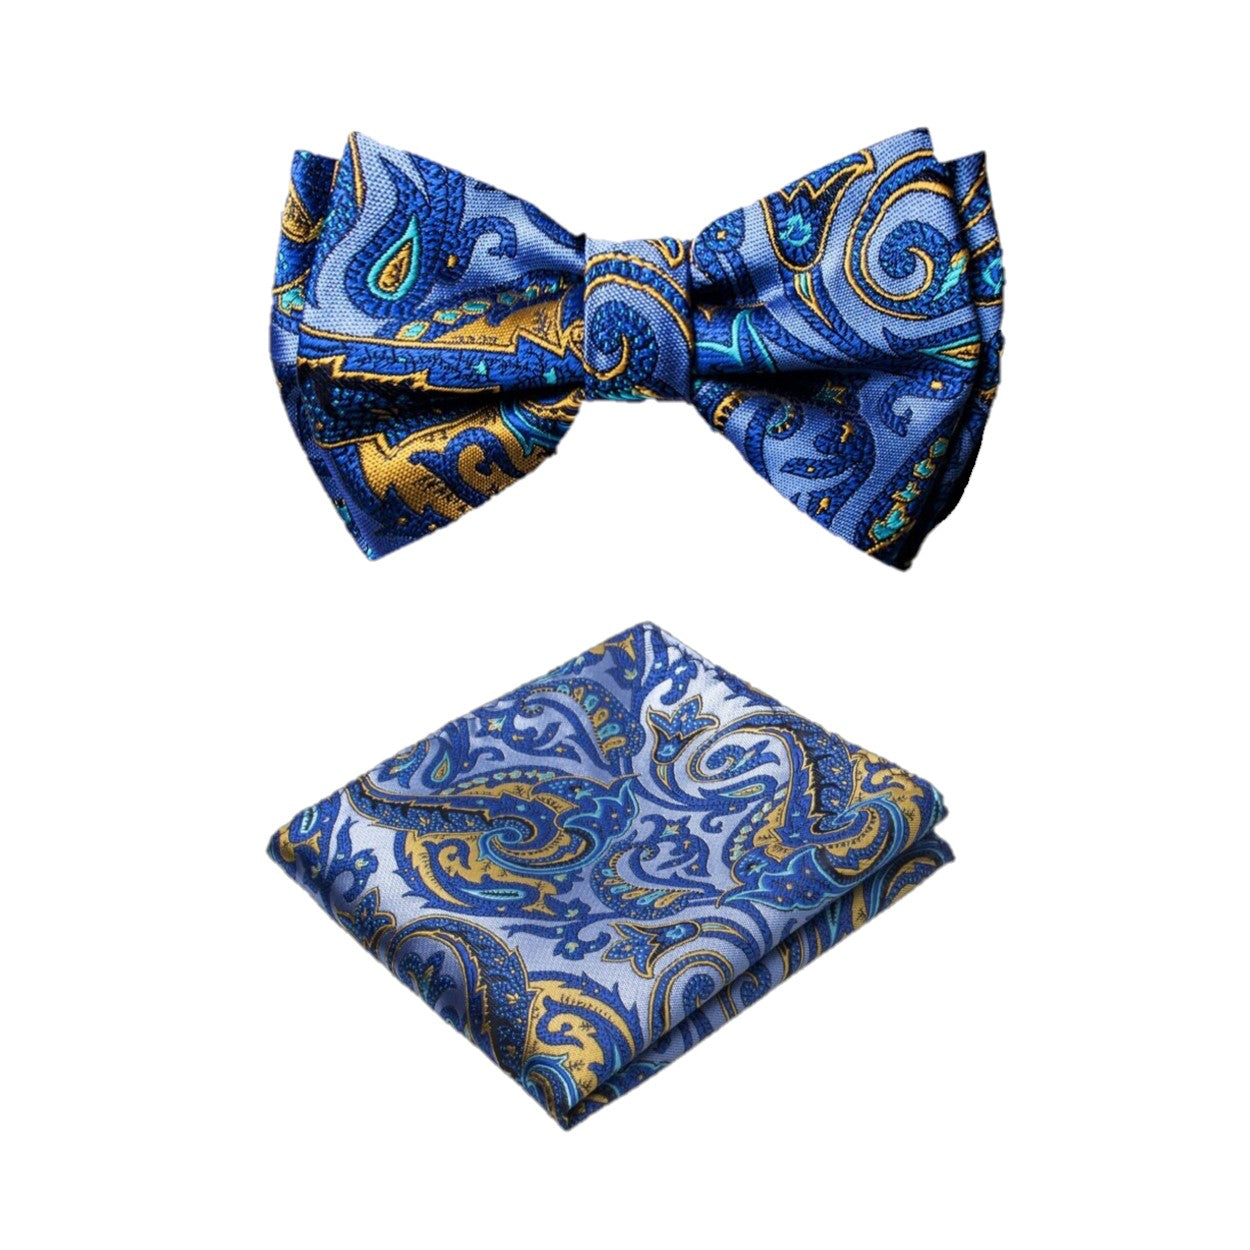 Main View: A Blue, Yellow Color Paisley Pattern Silk Kids Pre-Tied Bow Tie, Matching Pocket Square